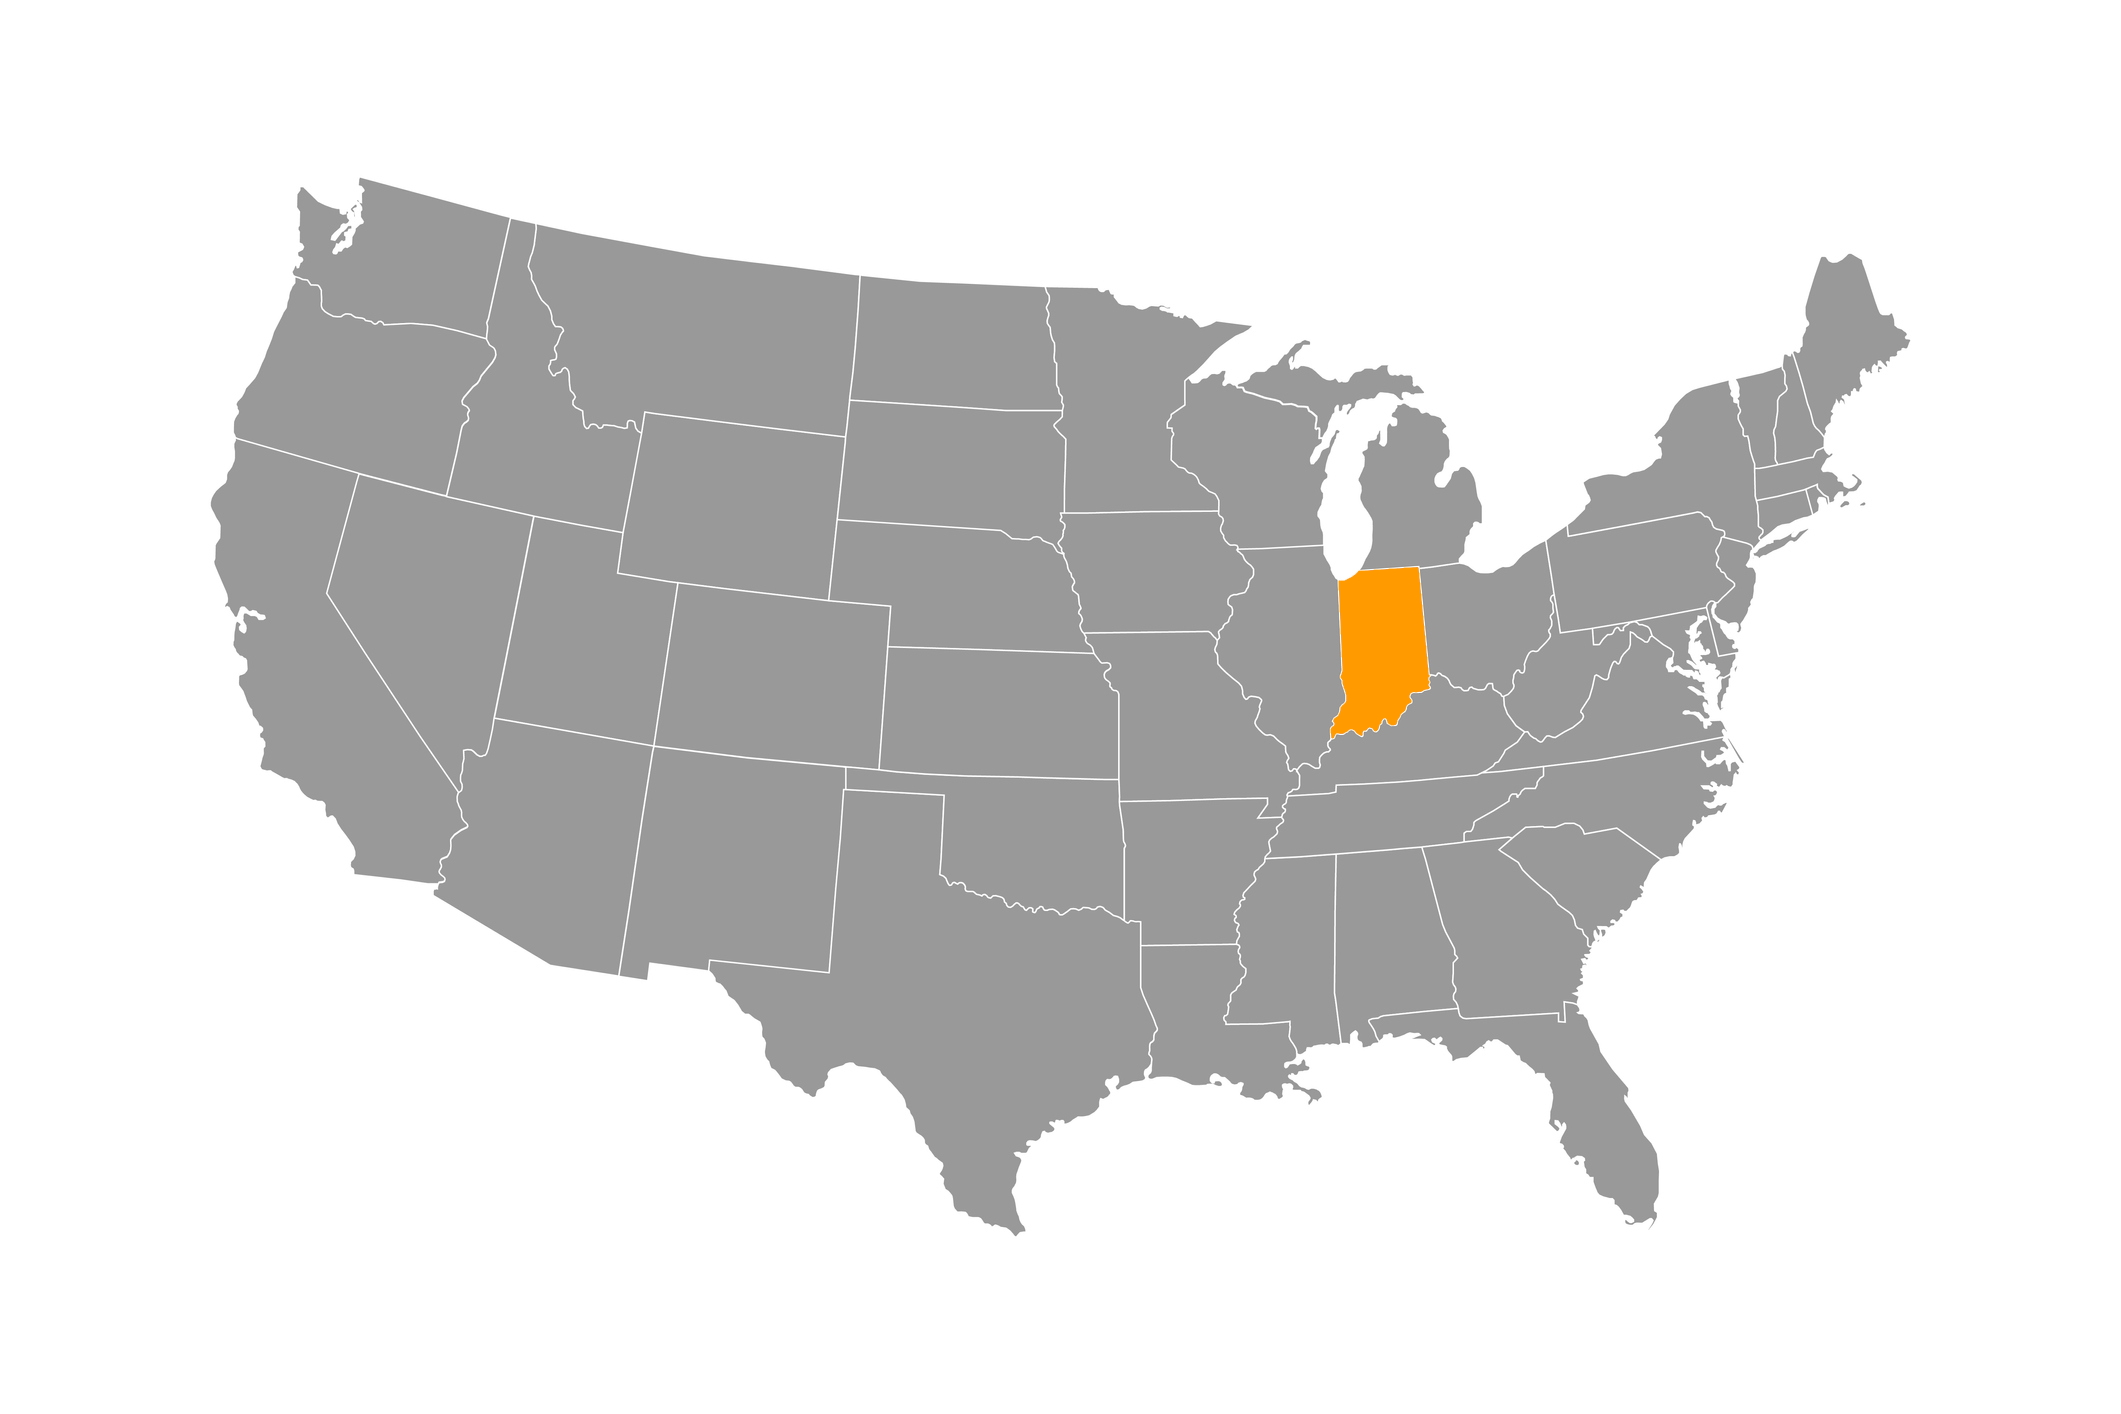 A map of the United States with Indiana highlighted in orange